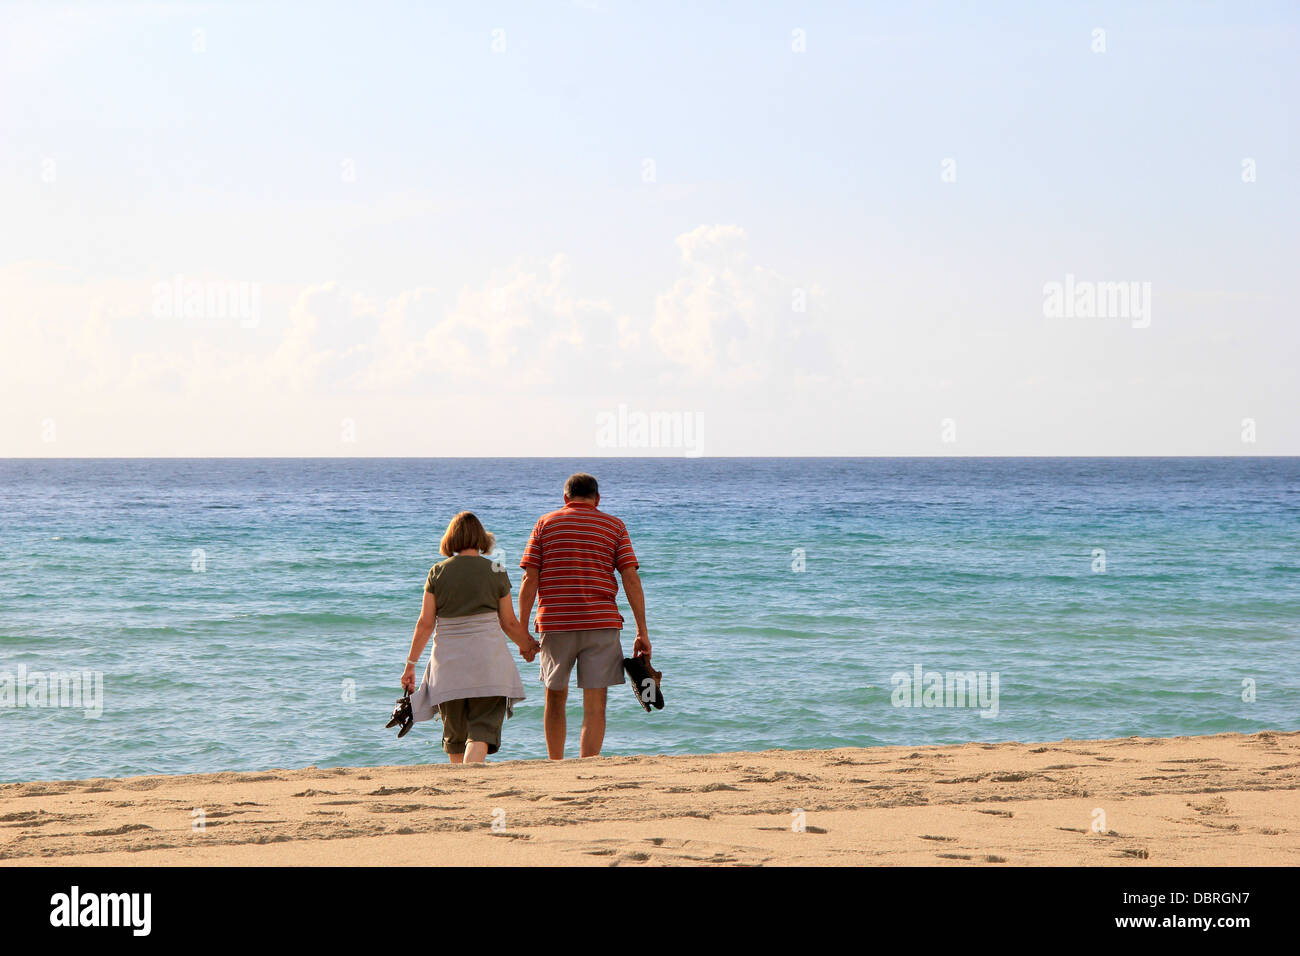 Man and woman holding shoes in one hand while other fingers are intertwined as they walk towards the water towards the shoreline Stock Photo